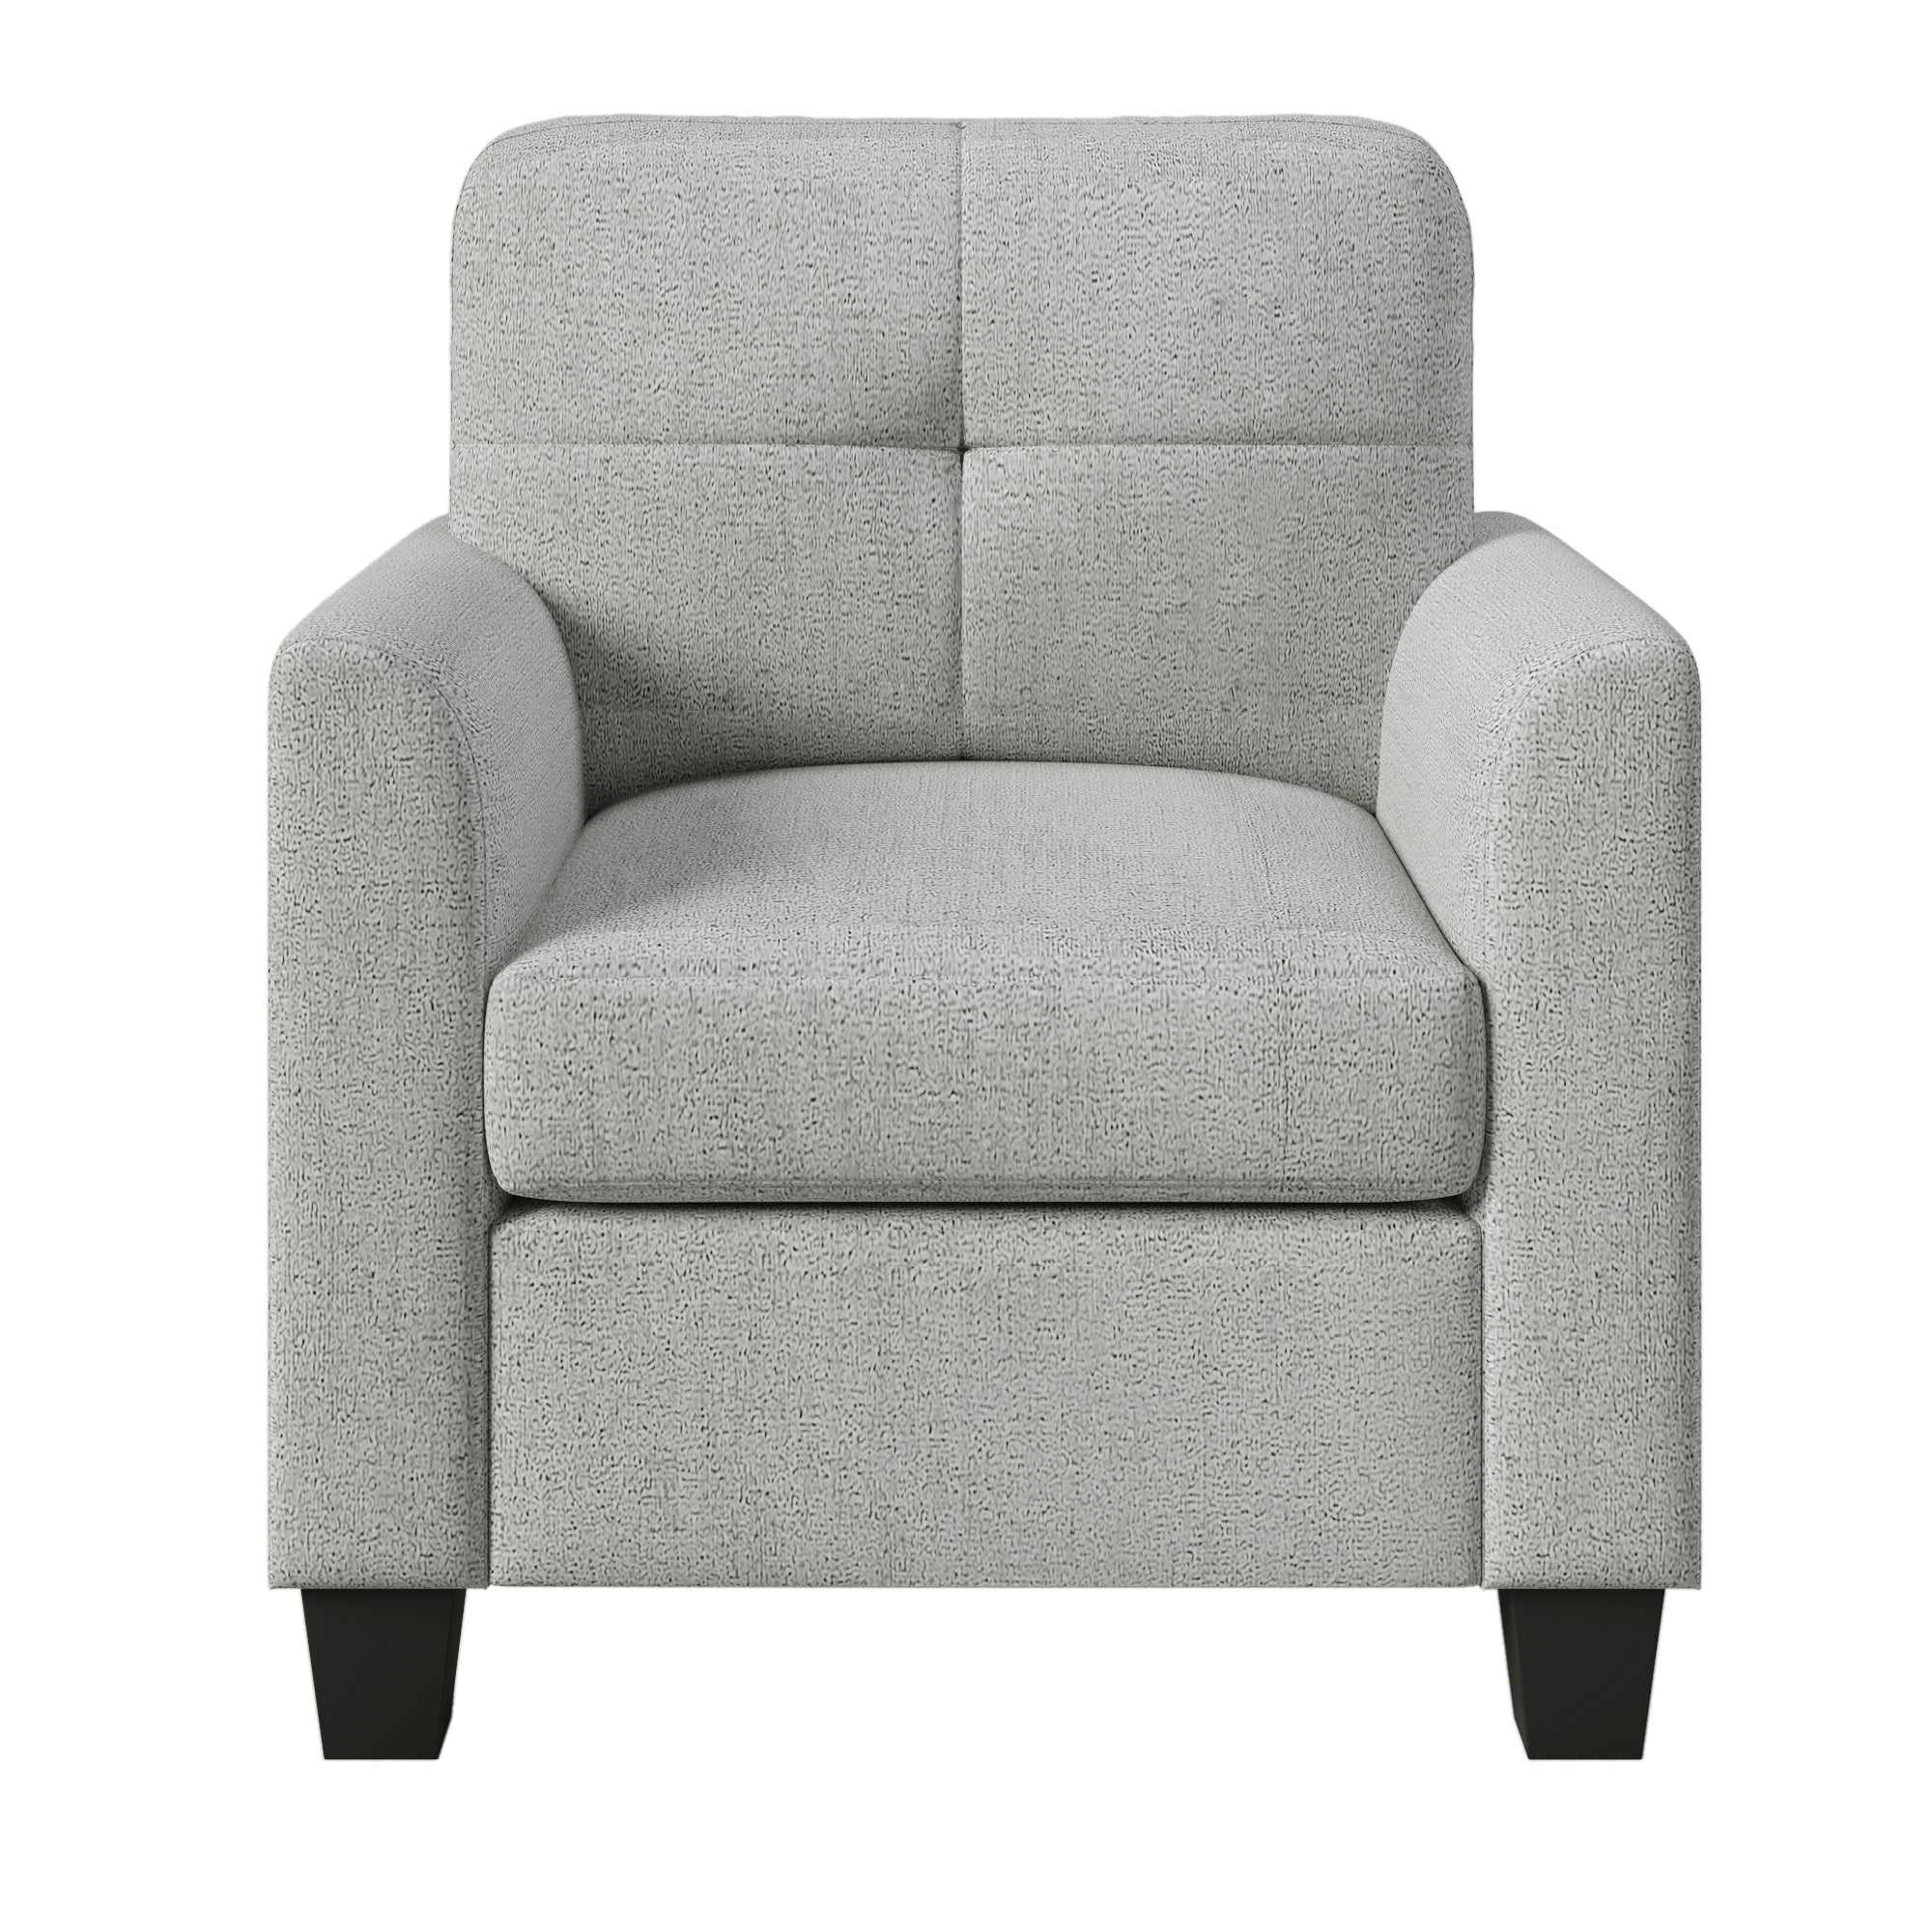 Mid Century Modern Accent Chair Cozy Armchair Button gray-primary living space-polyester